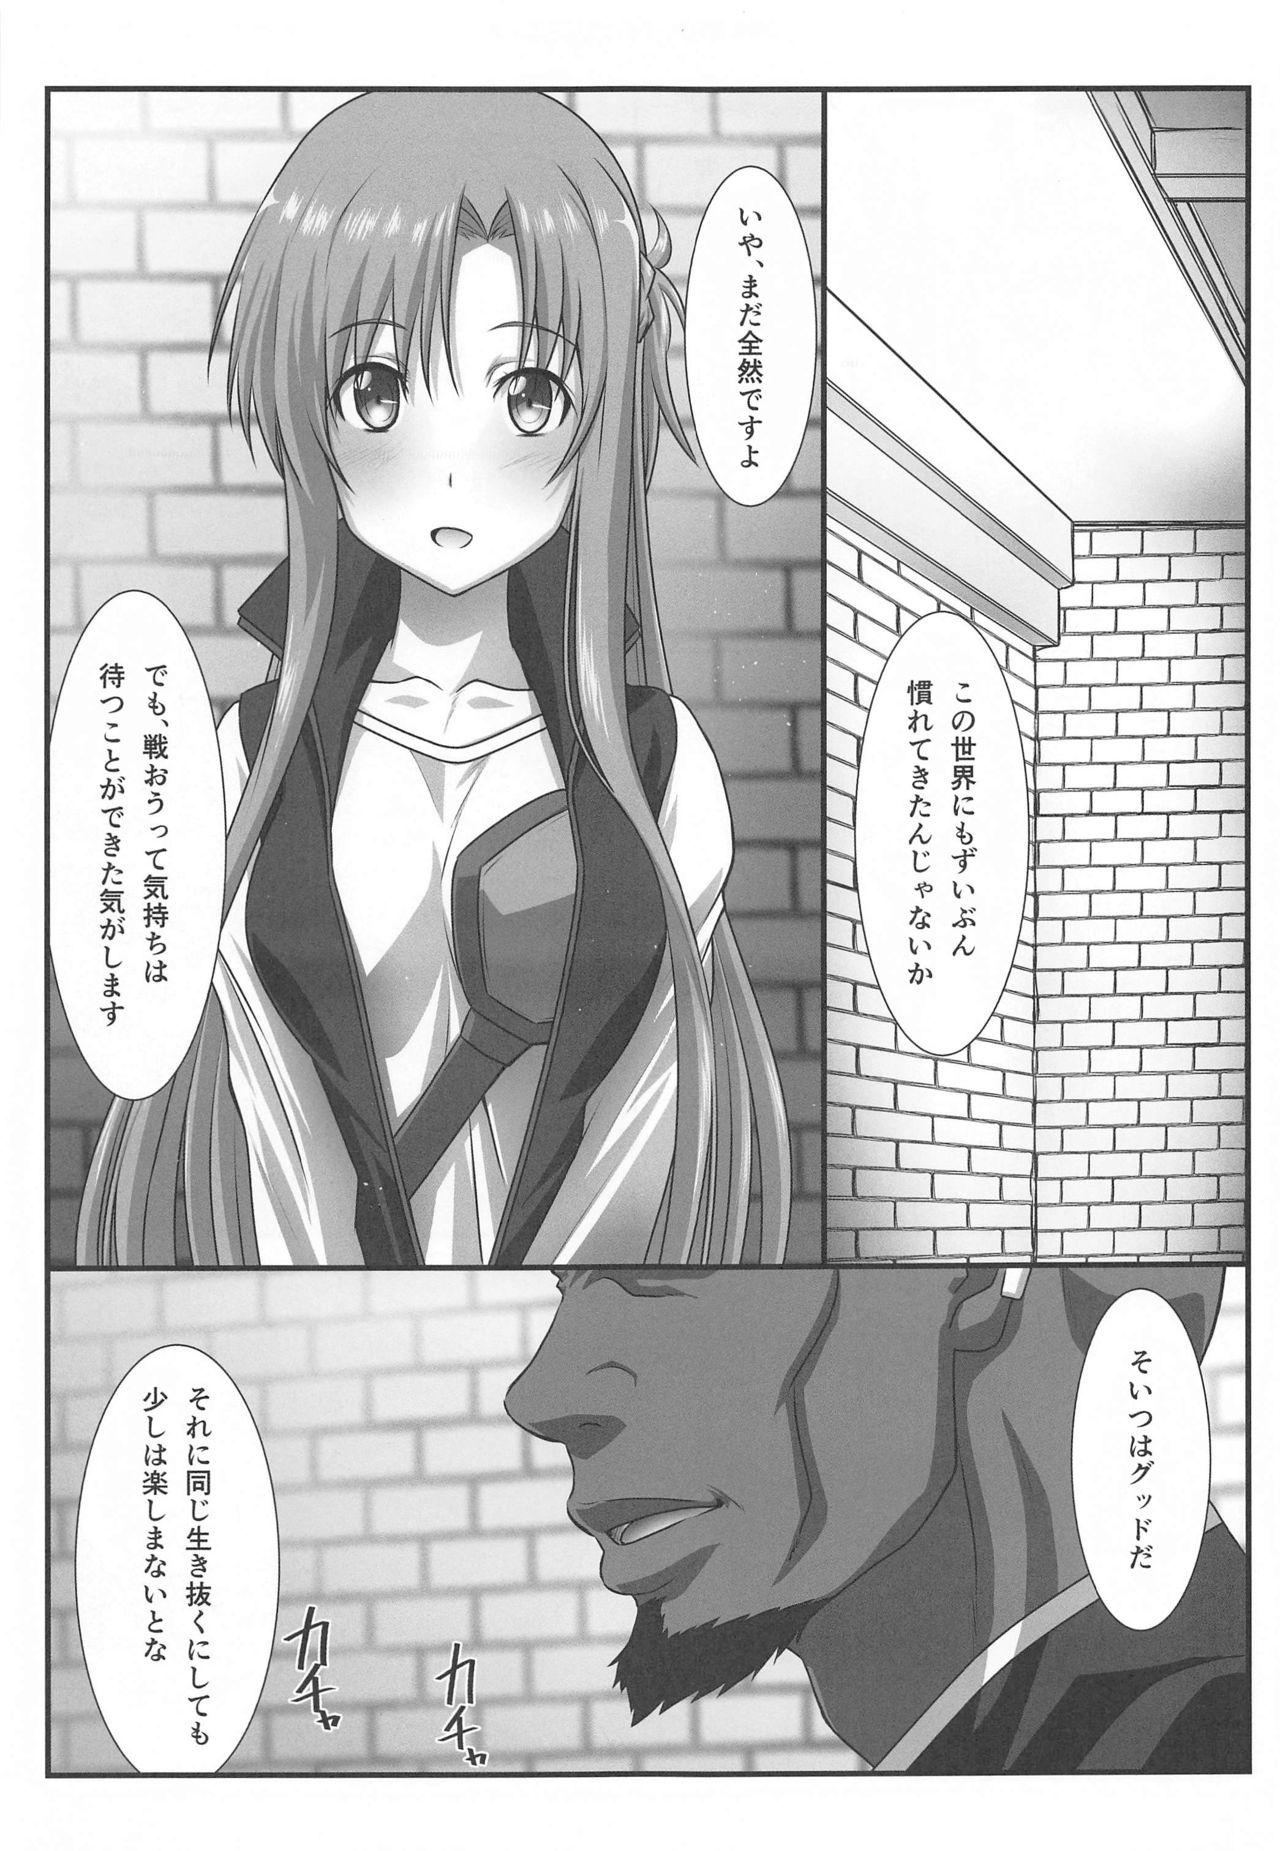 Shemales Astral Bout Ver. 44 - Sword art online Nalgas - Page 8